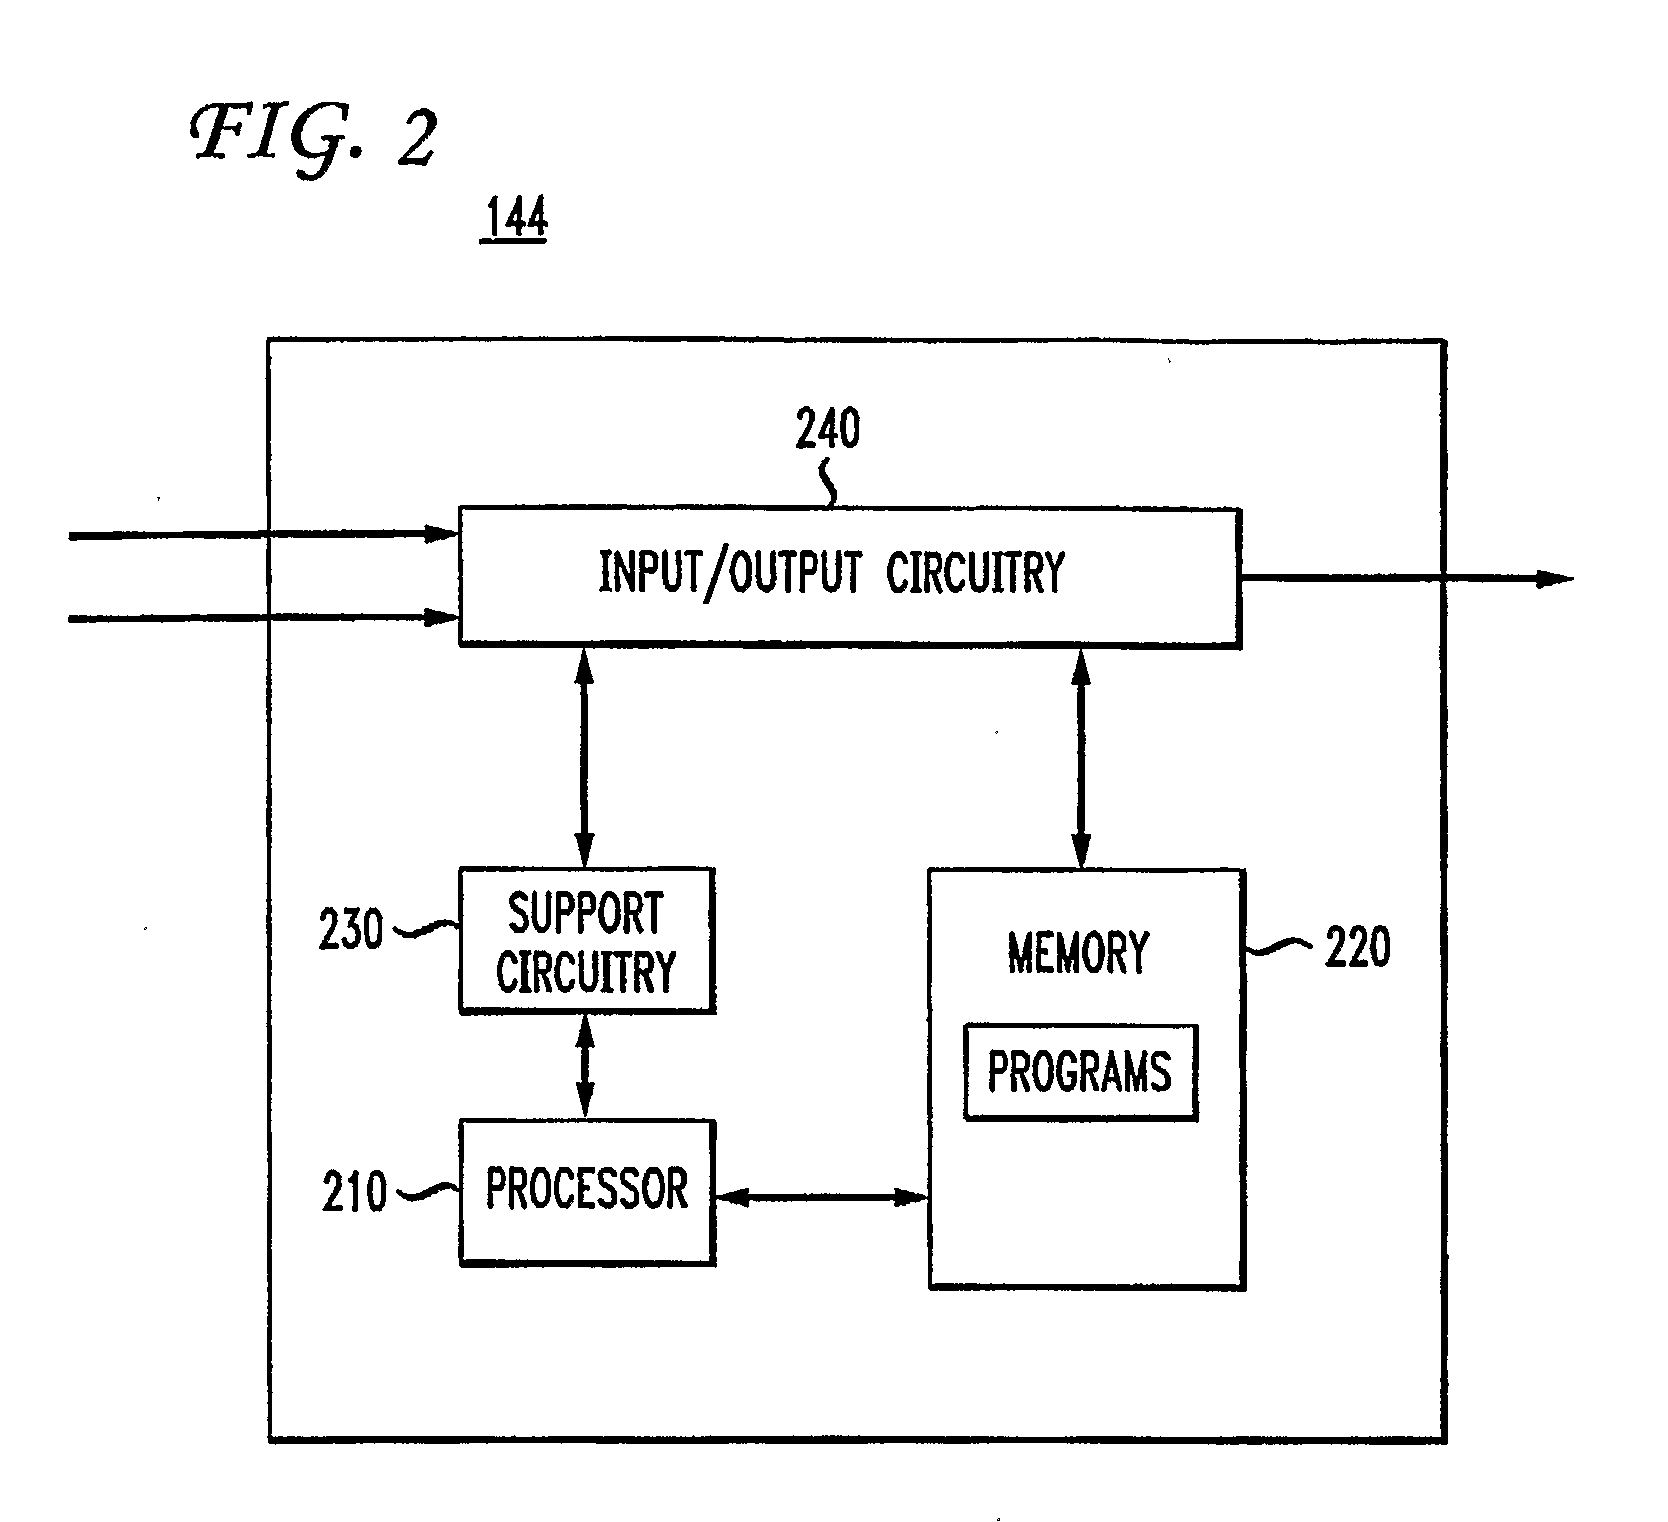 System, method and apparatus for enabling channel surfing while buffering and recording of preferred channels